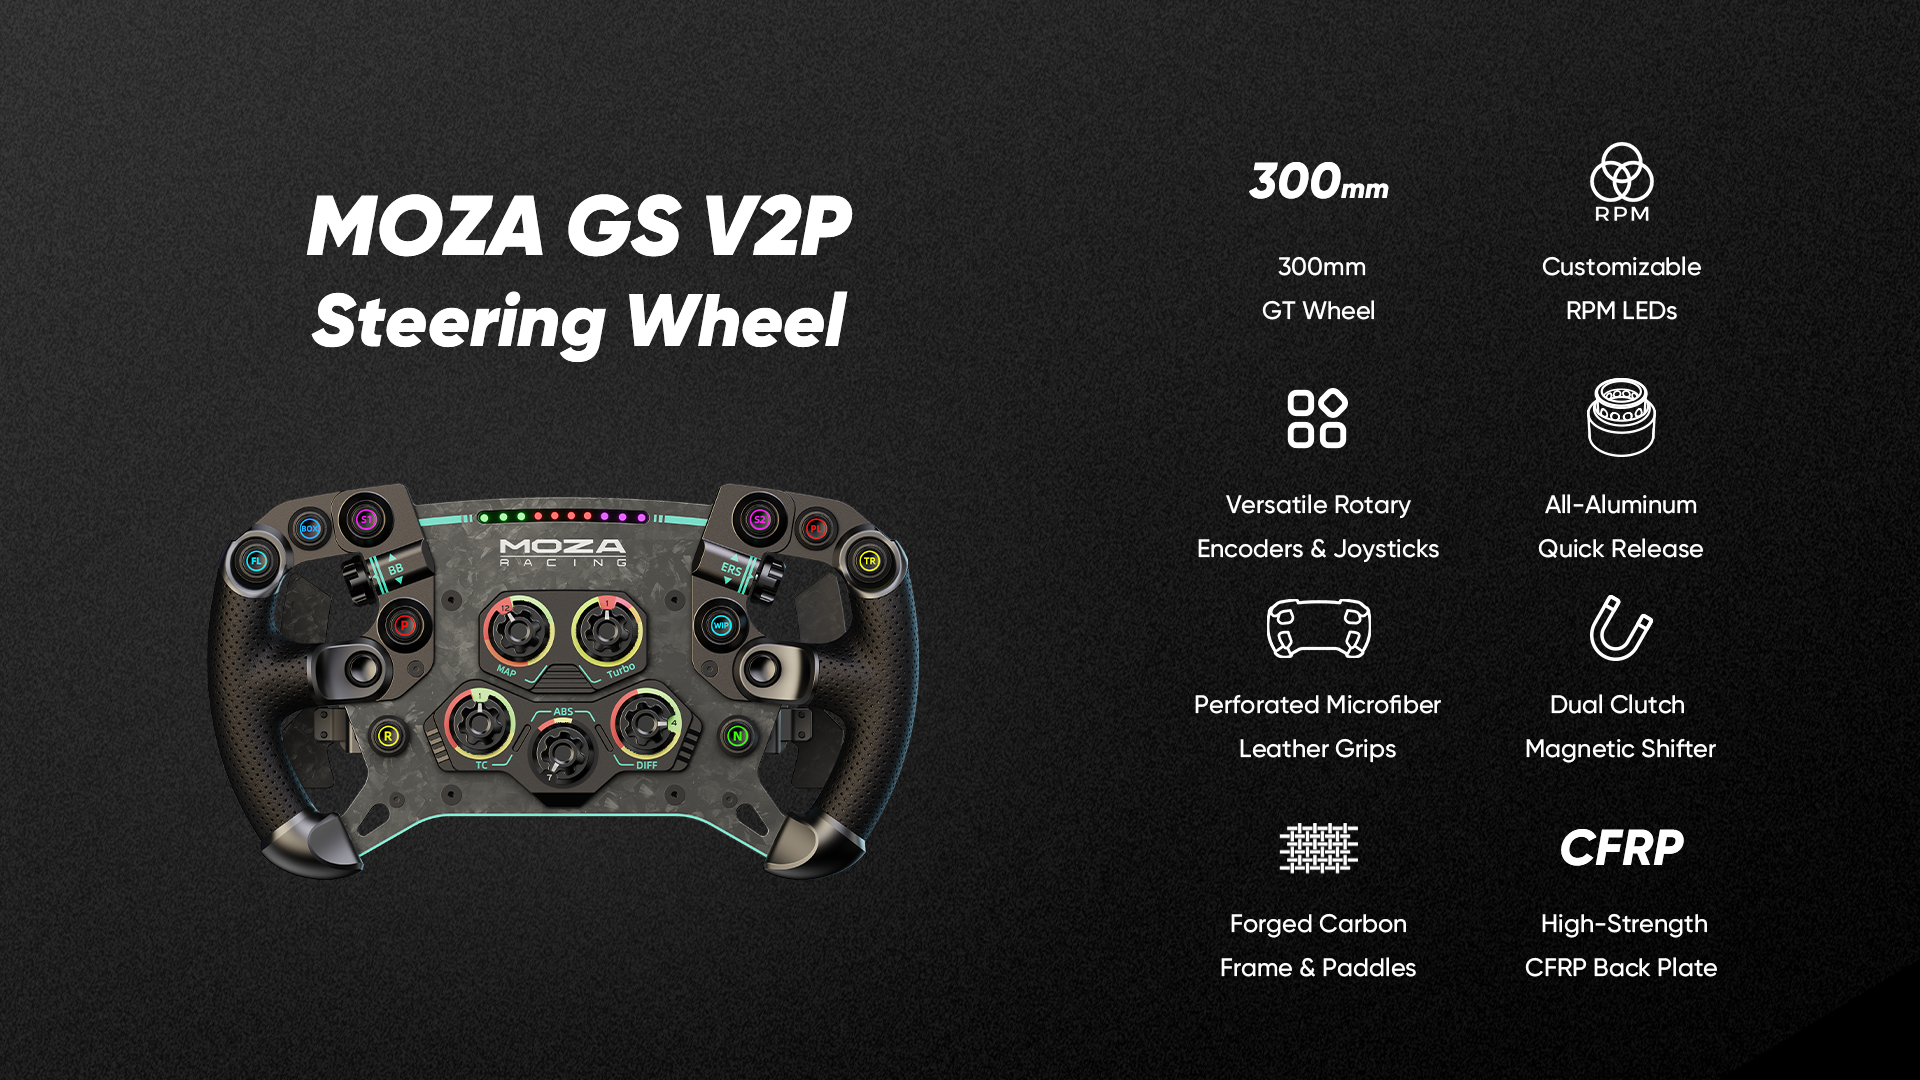 A large marketing image providing additional information about the product MOZA GS V2P Steering Wheel Microfiber Leather Version - Additional alt info not provided